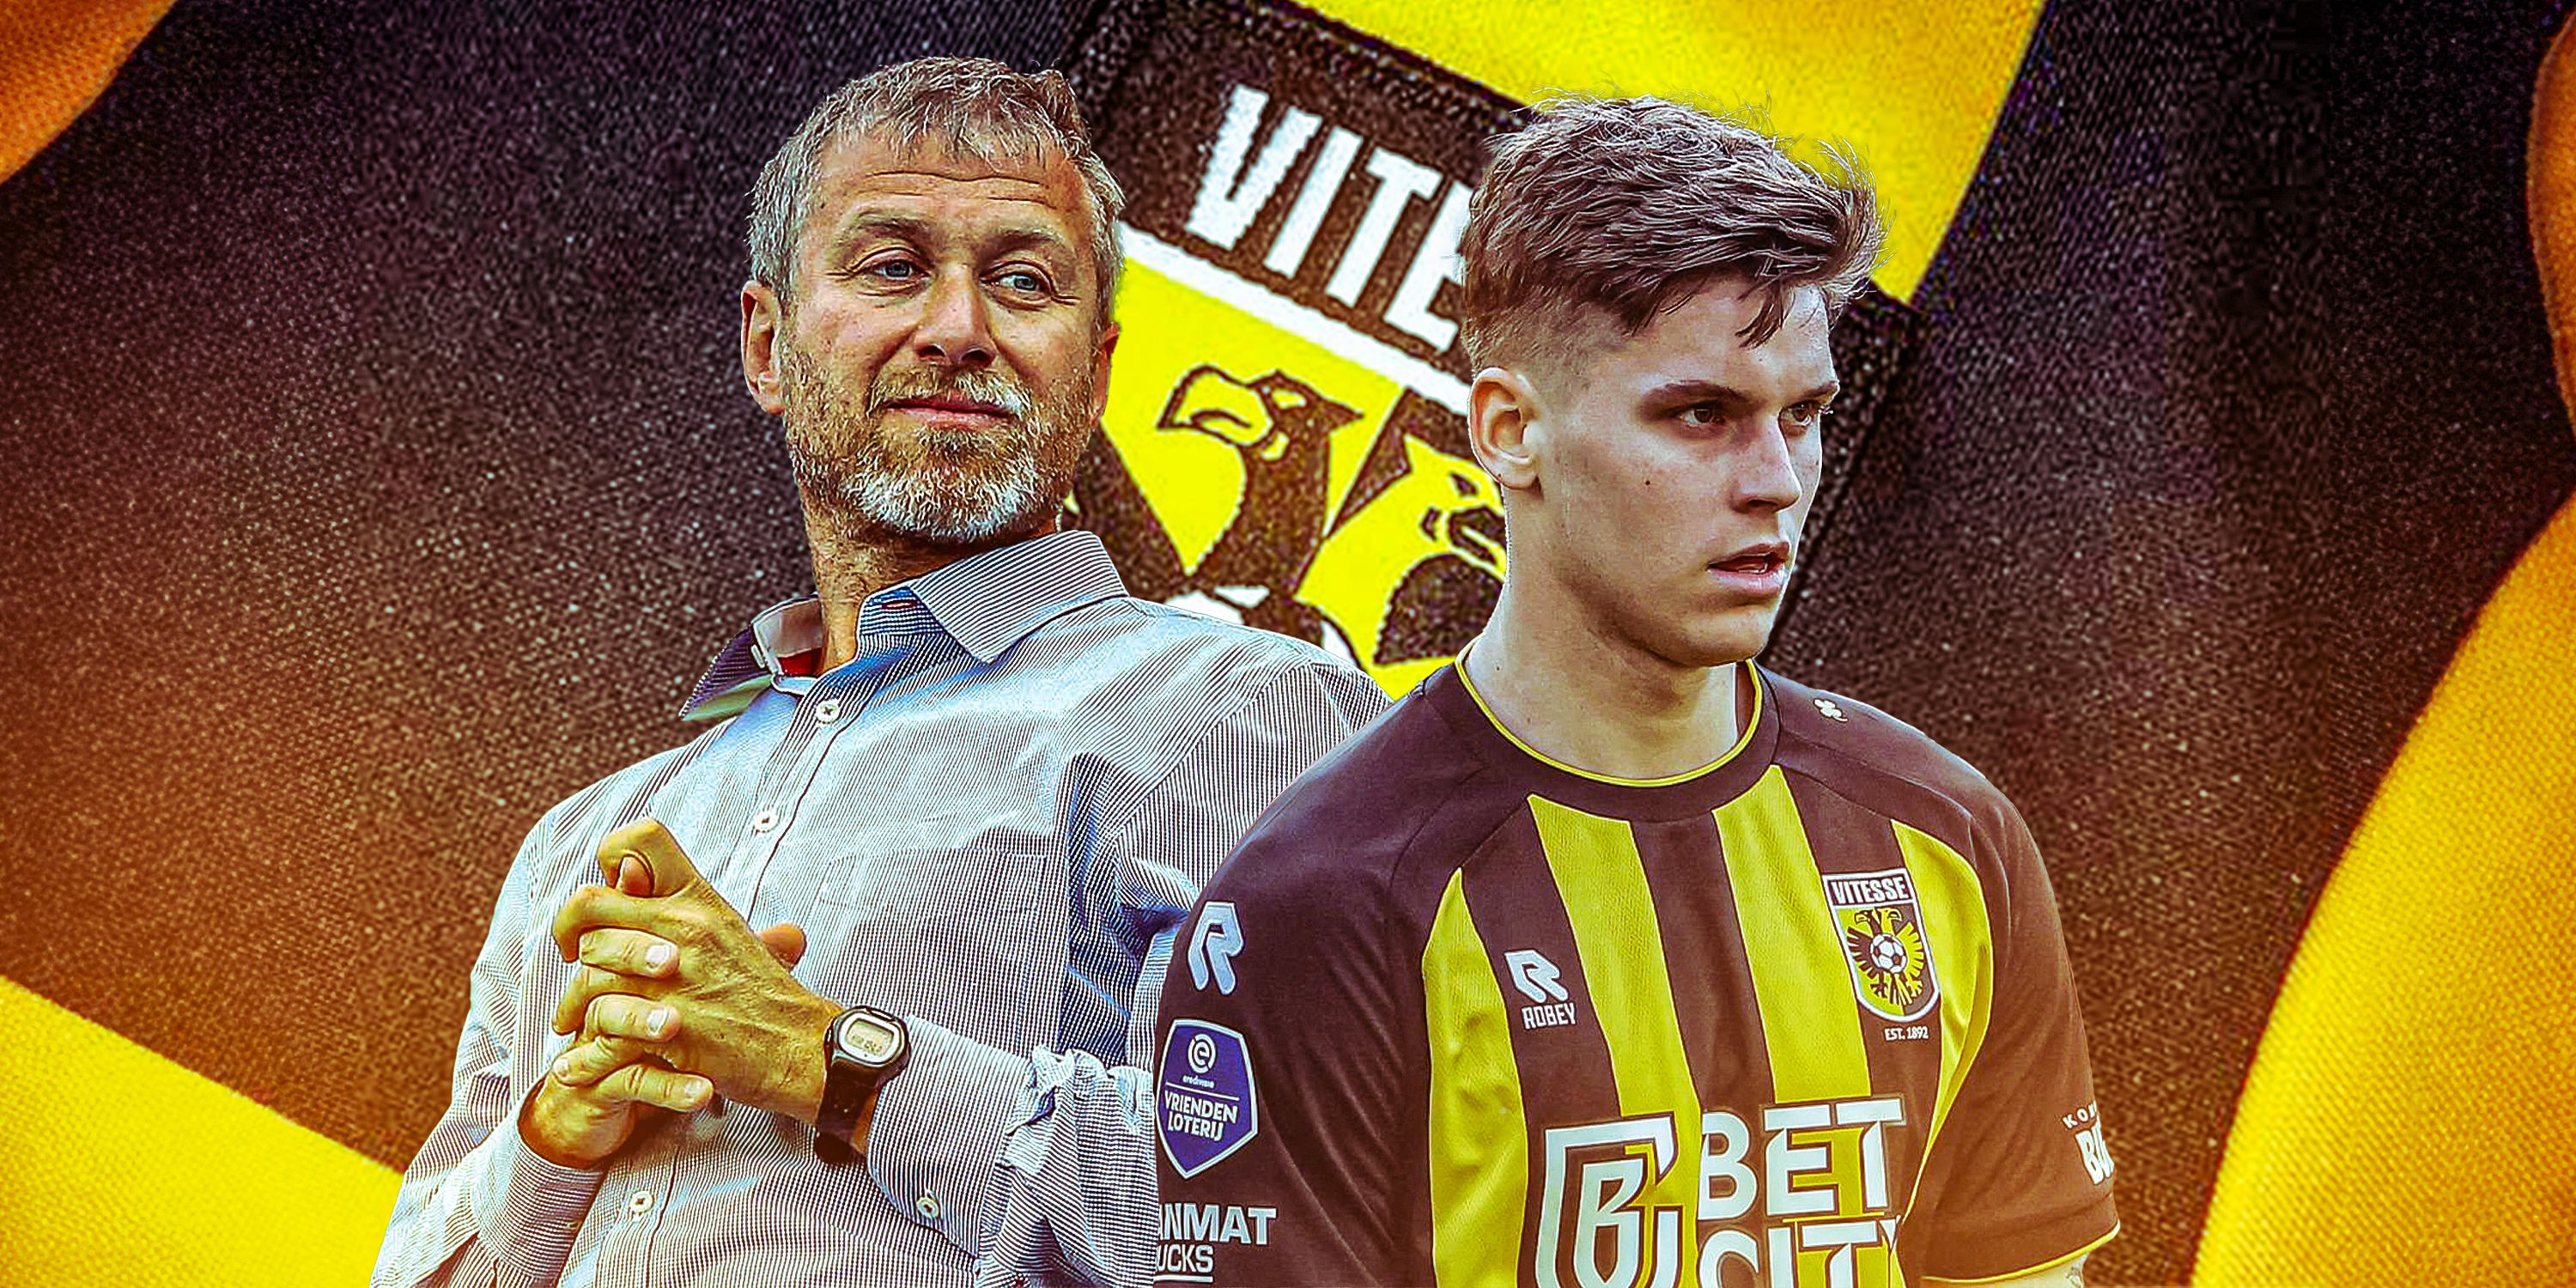 Roman Abramovich and the Vitesse badge and a Vitesse player in their yellow kit from this season looking dejected